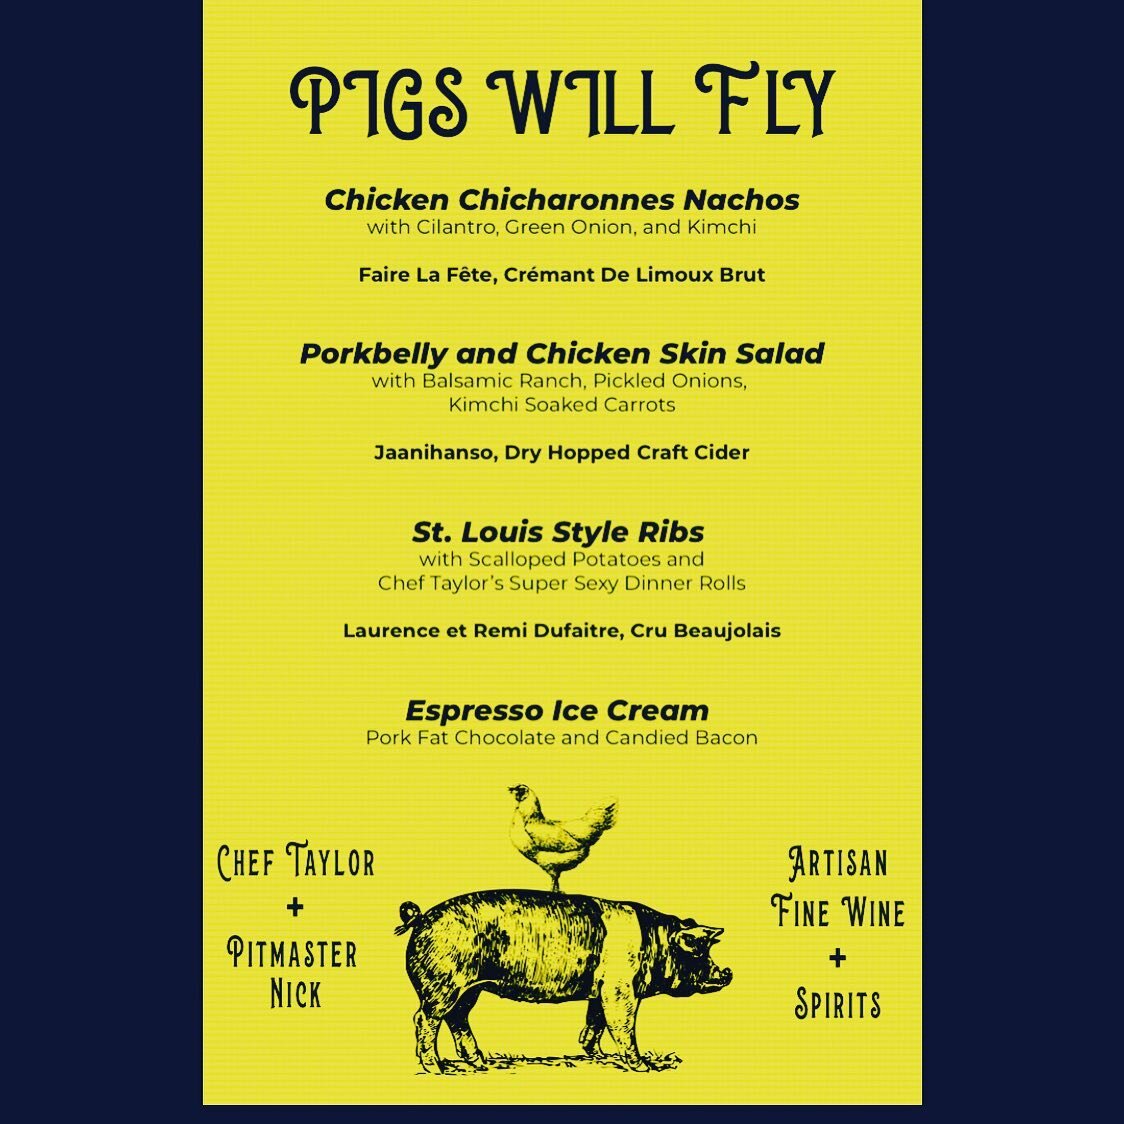 Pigs Will Fly dinner with our friends @foolishbarandbiscuit on Wines(day) and we want you to join us! Sign up through their website. http://barandbiscuit.com/winesdayreso